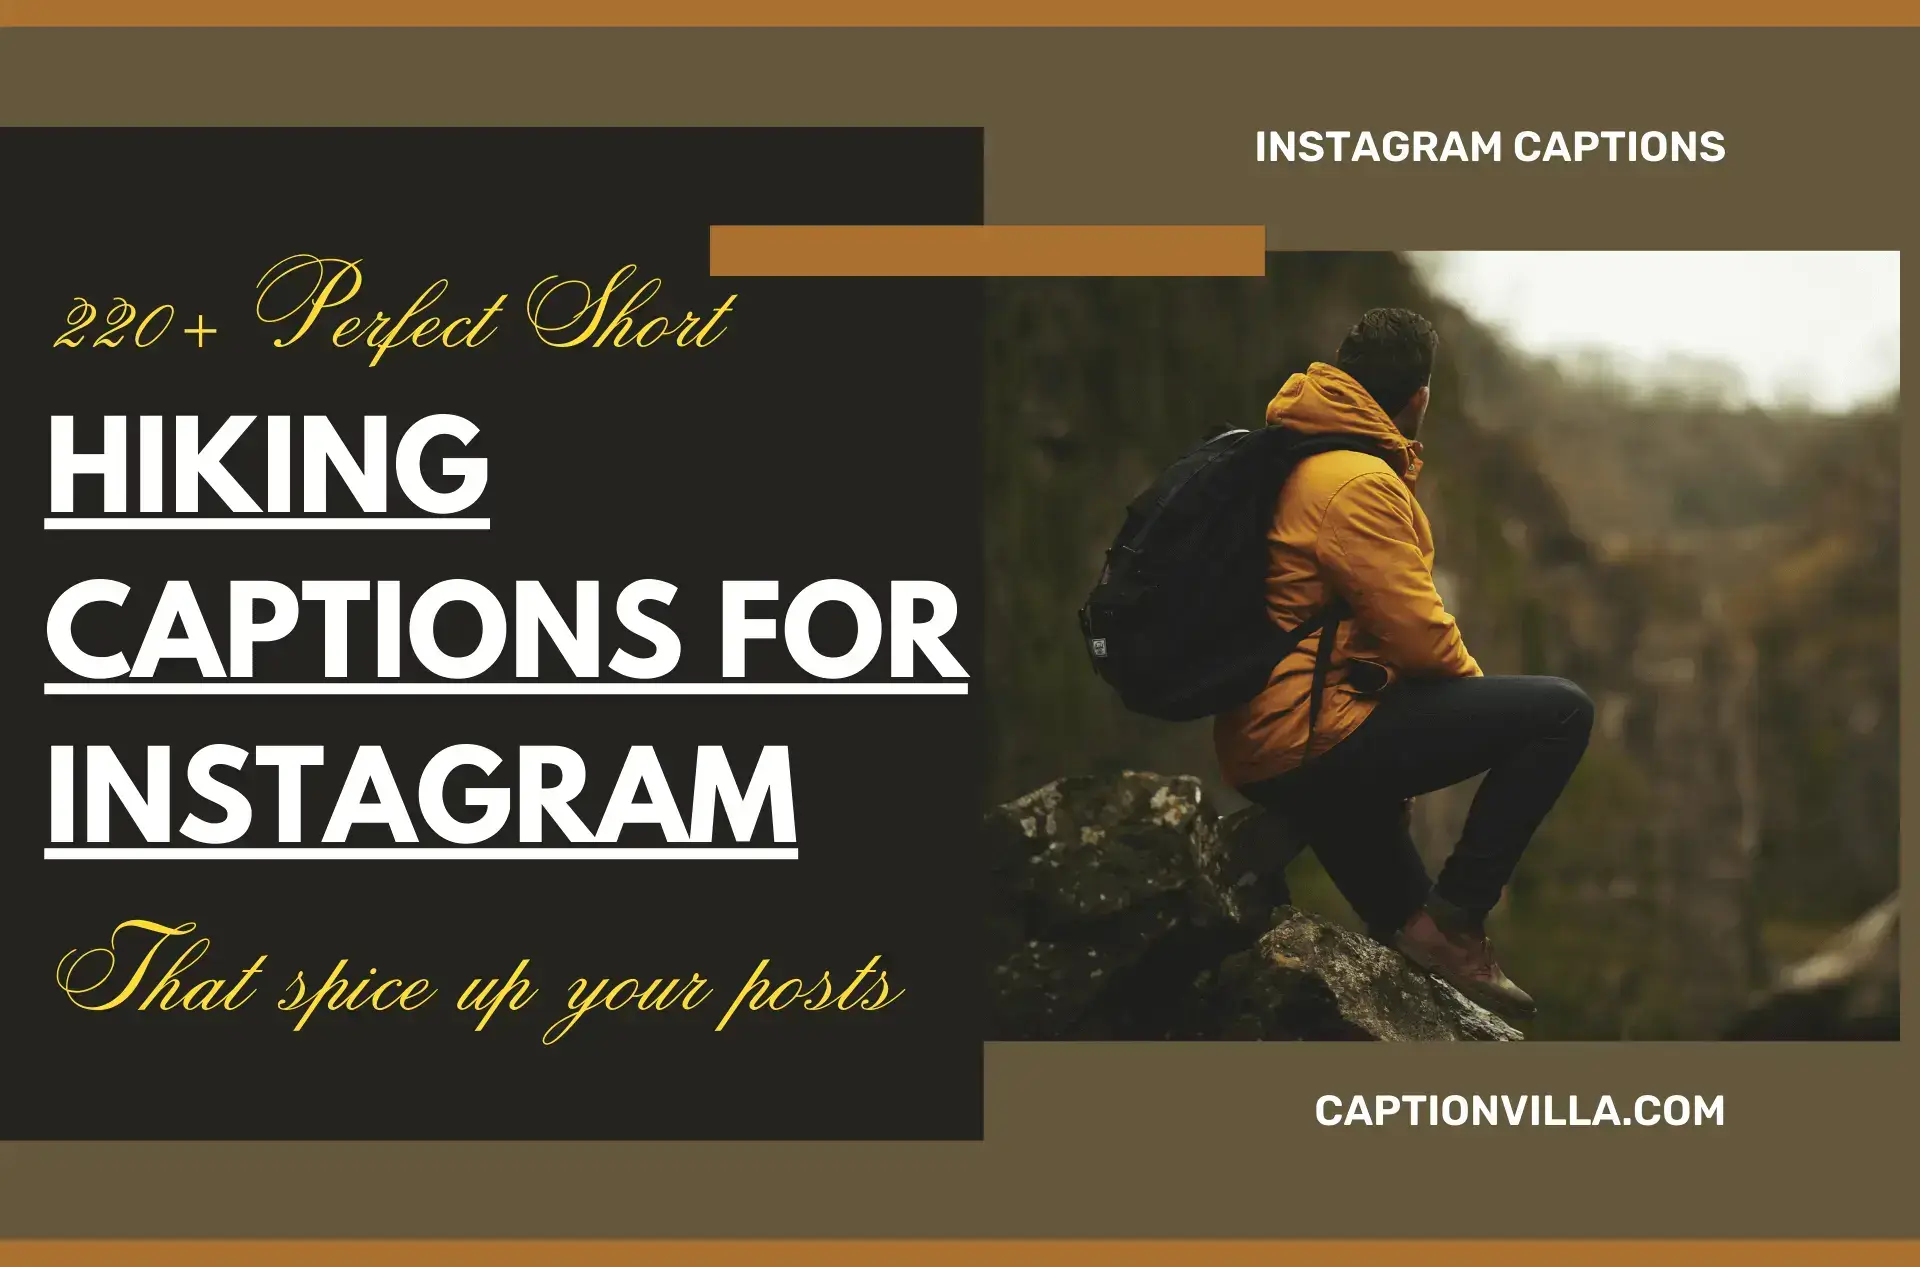 This image includes the title of Hiking Captions for Instagram.